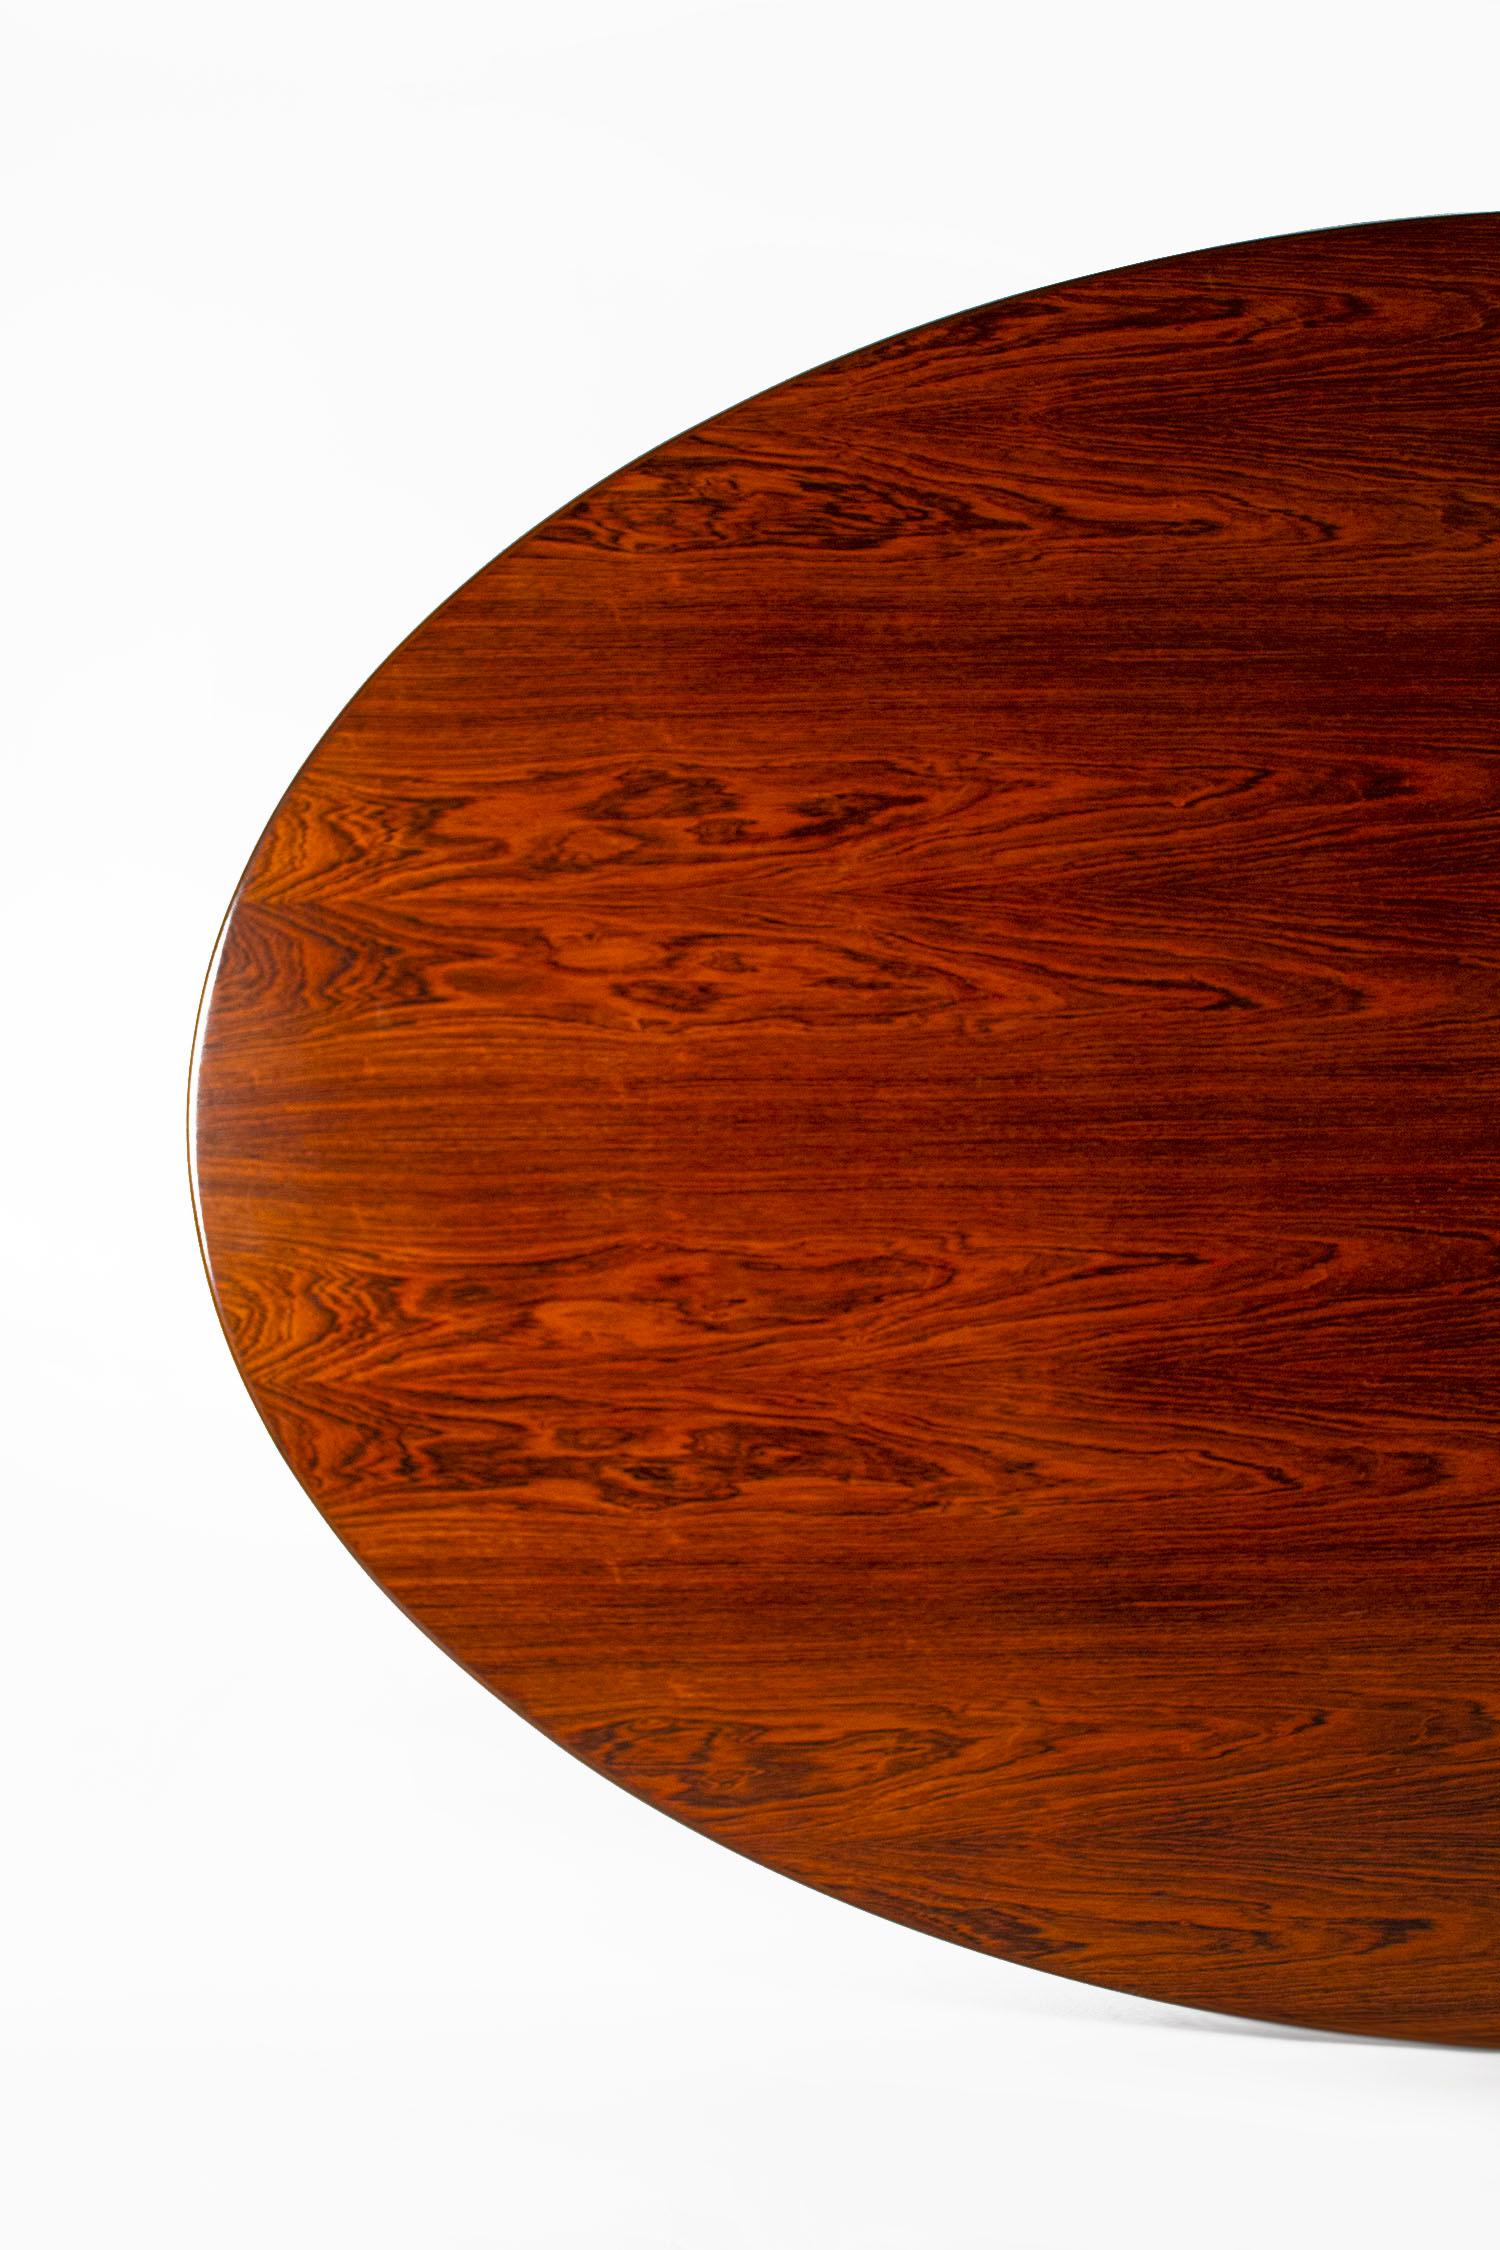 American Florence Knoll Table Desk in Exotic Brazilian Rosewood